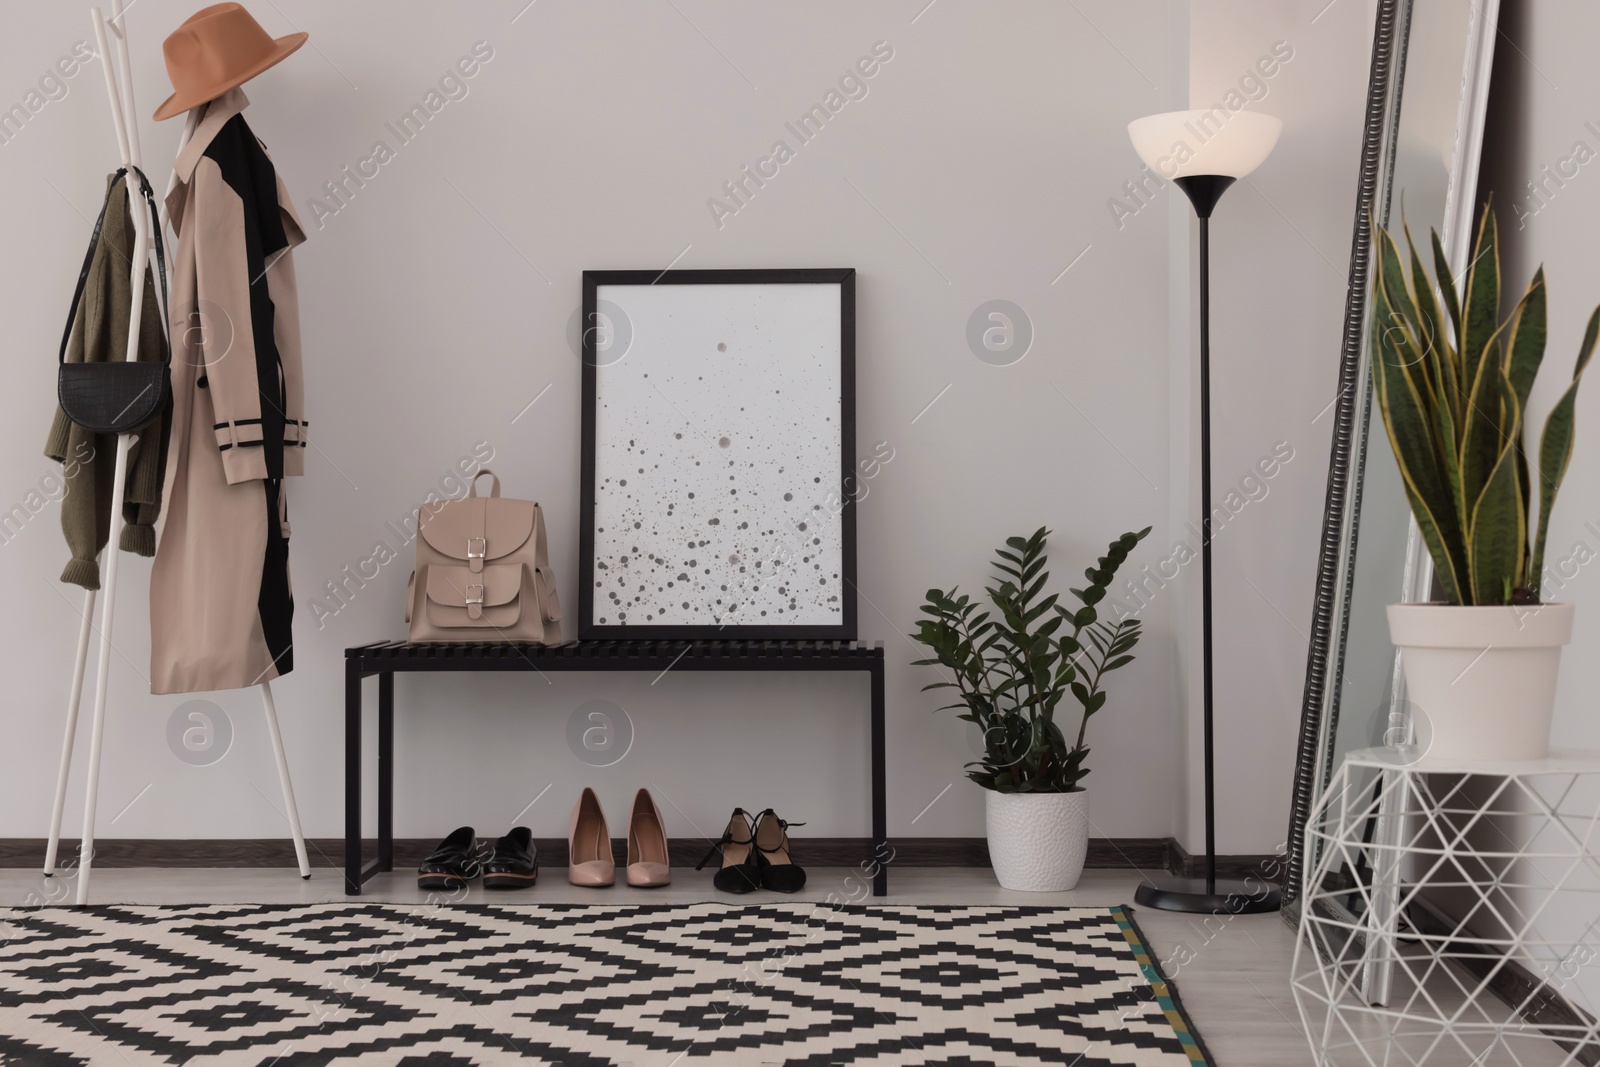 Photo of Stylish hallway room interior with bench, shoes, clothes rack and floor mirror